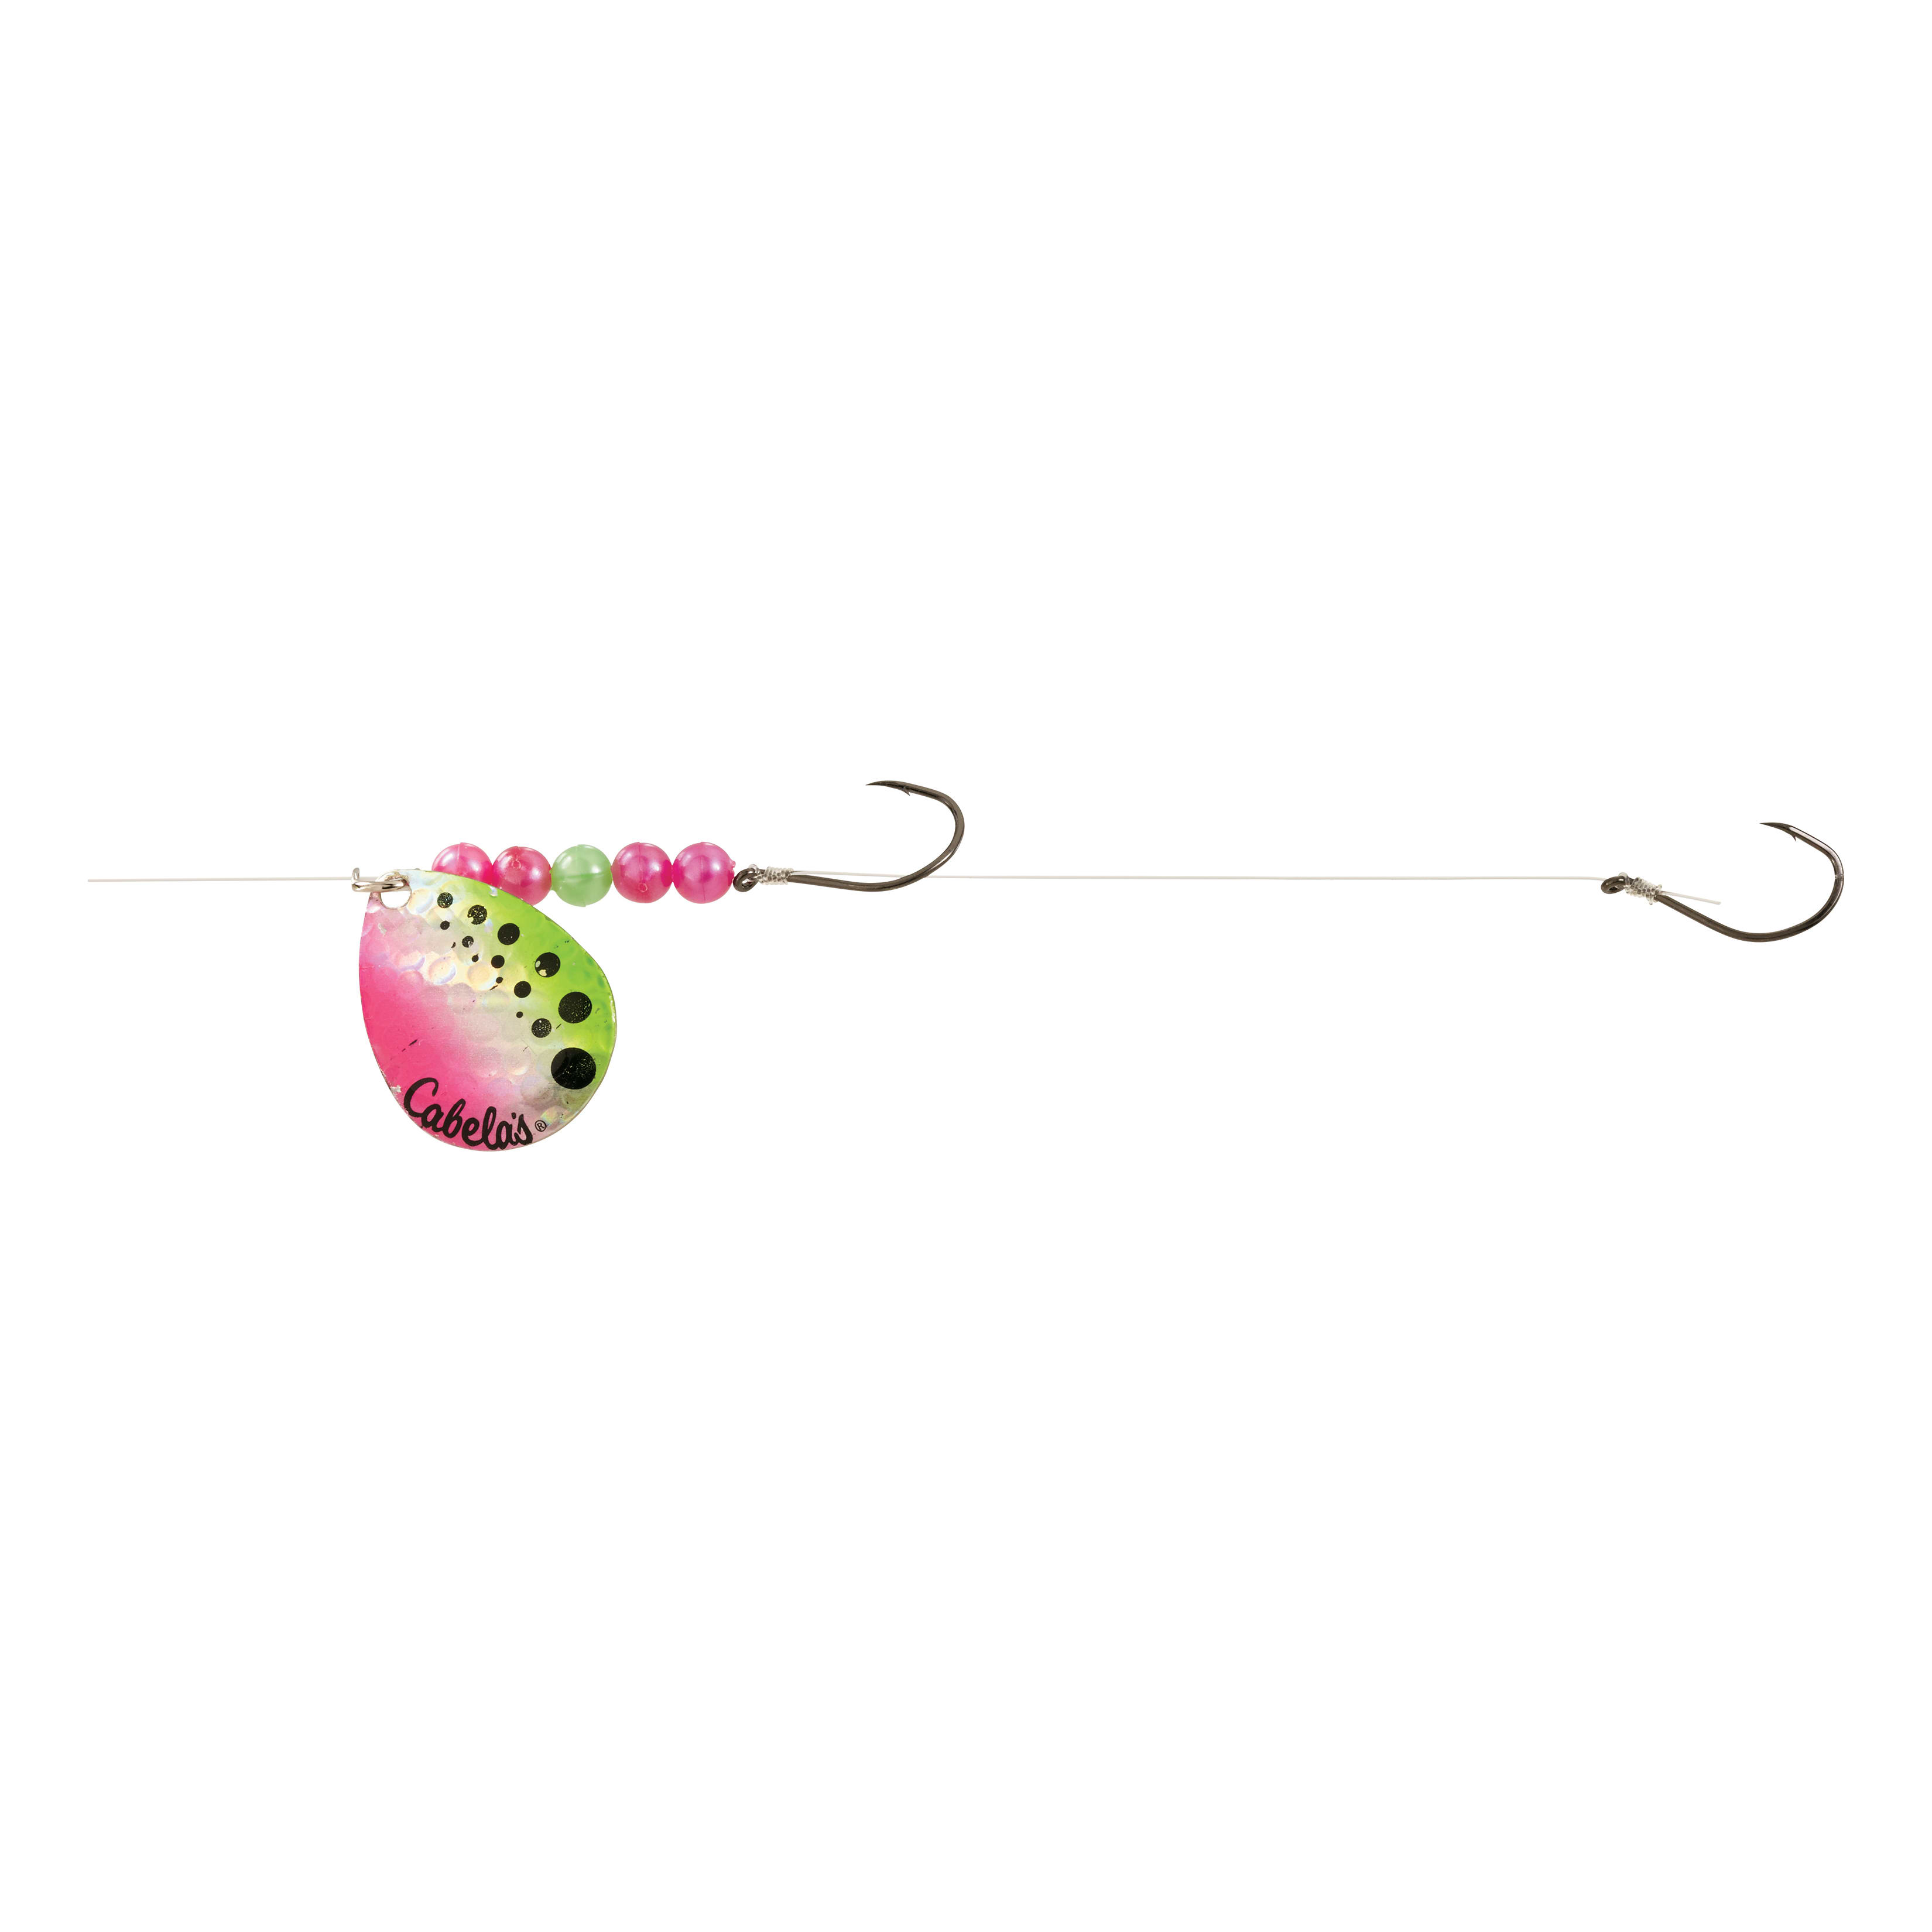 Cabela's® Charter Series Walleye Rig